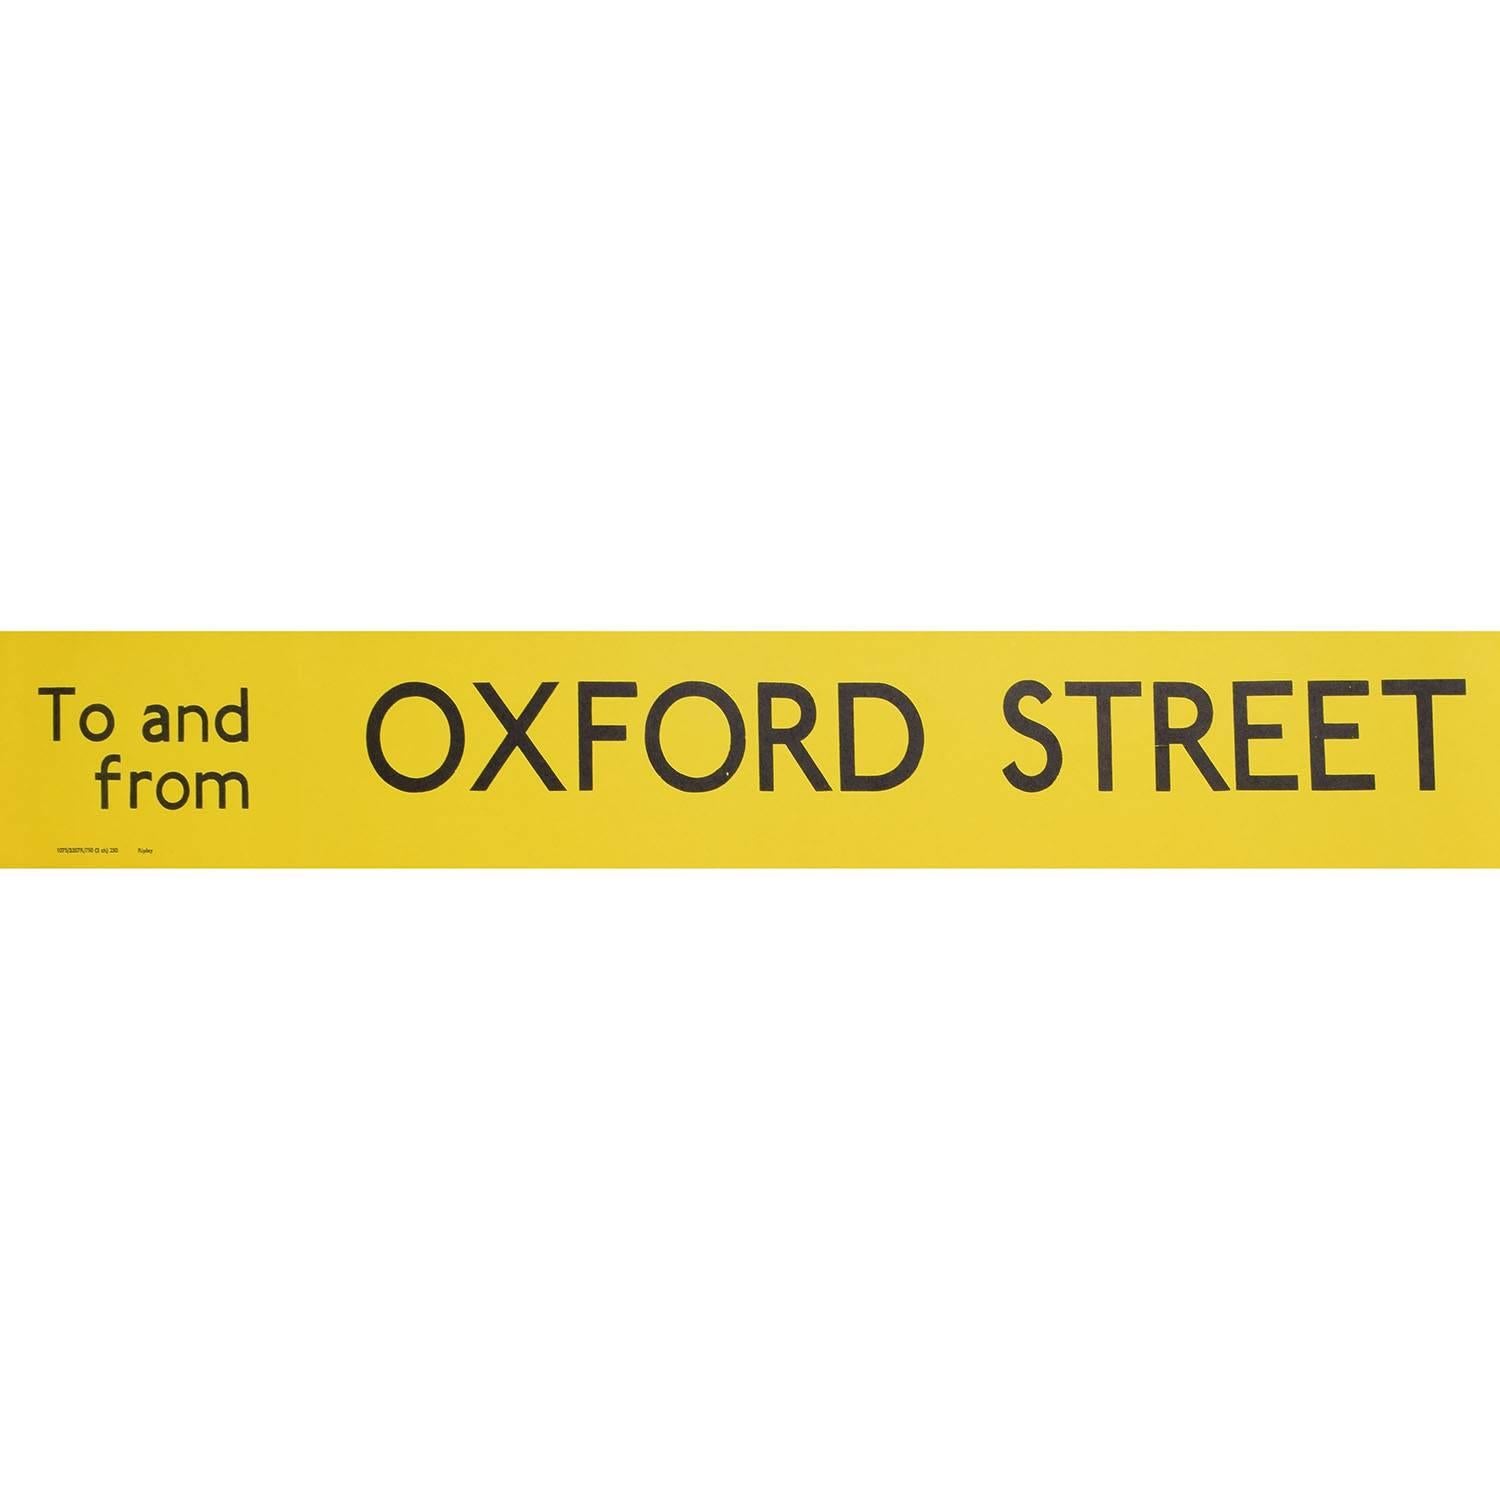 Unknown Print - Oxford Street, London England Routemaster or RT Bus sign c. 1970